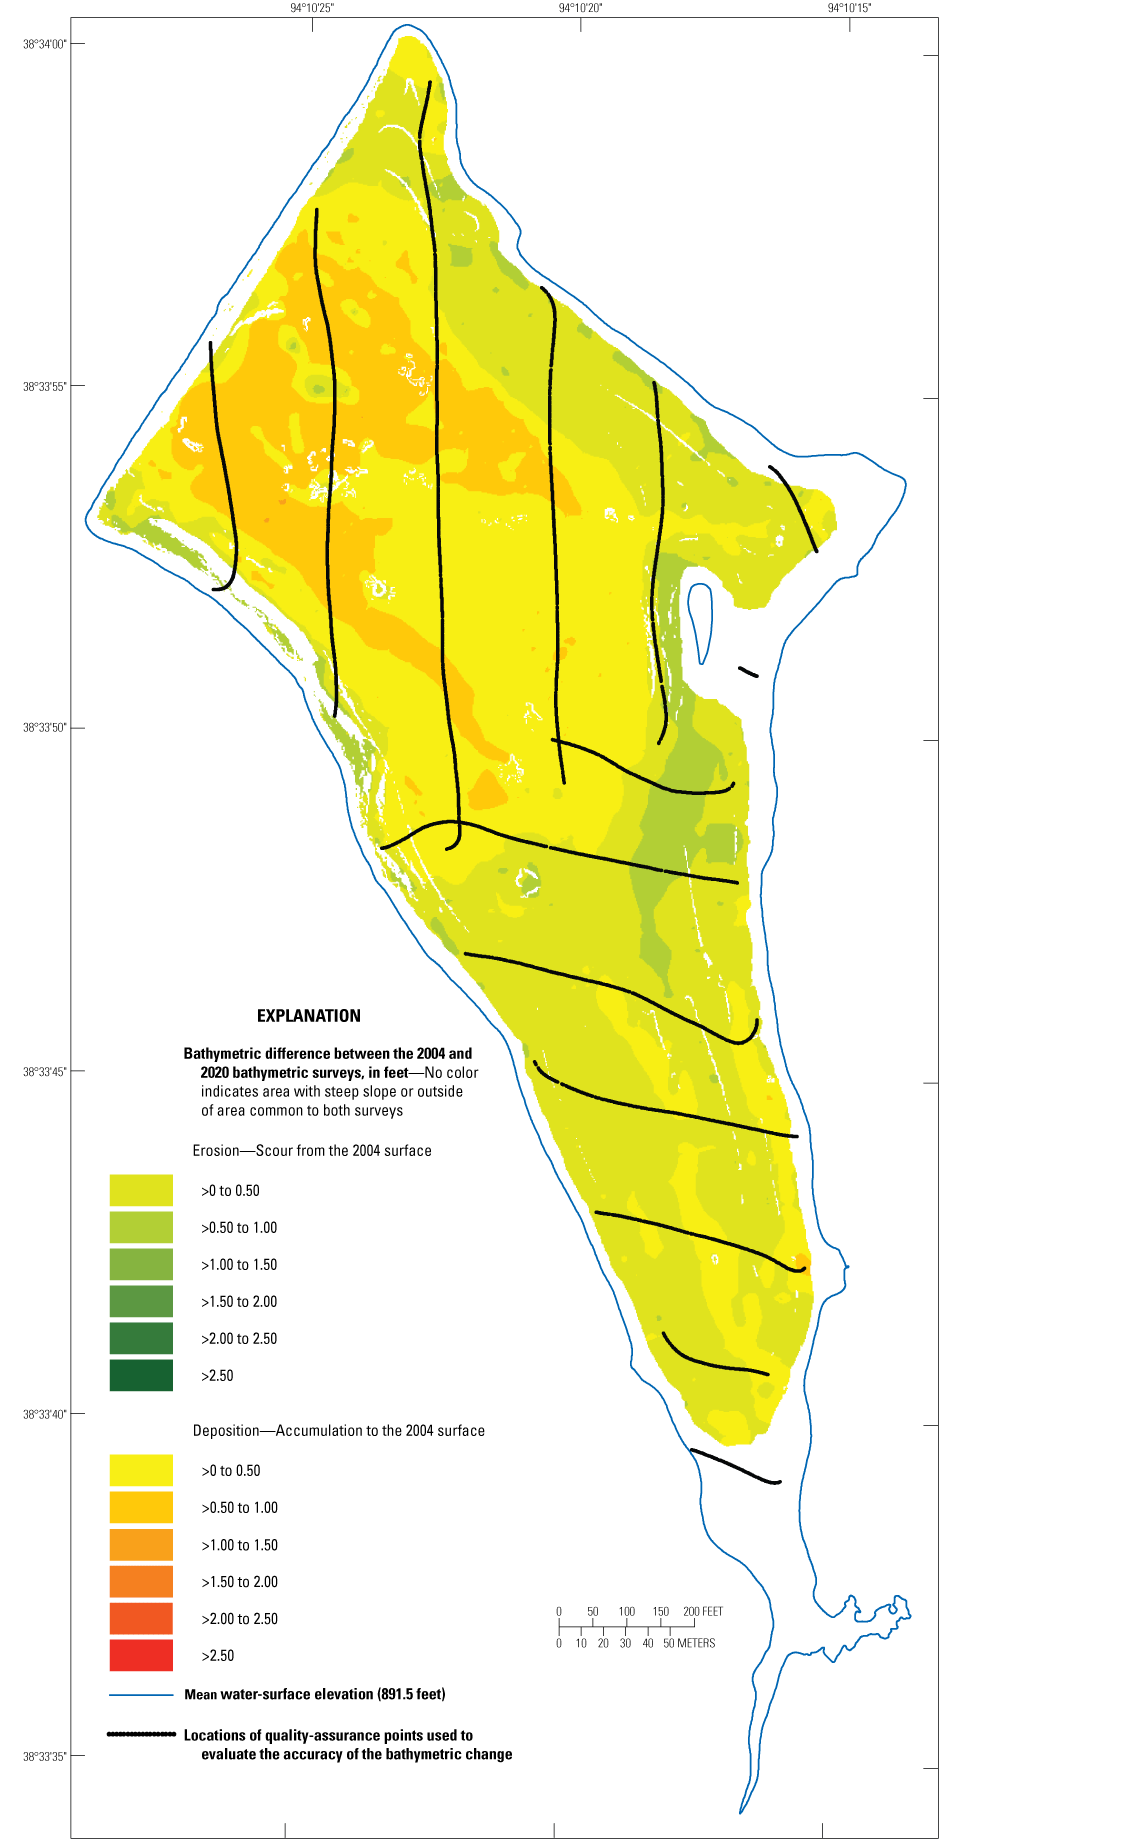 Change in bathymetry at Garden City Lake near Garden City ranges from −0.92 to 1.01
                     feet.